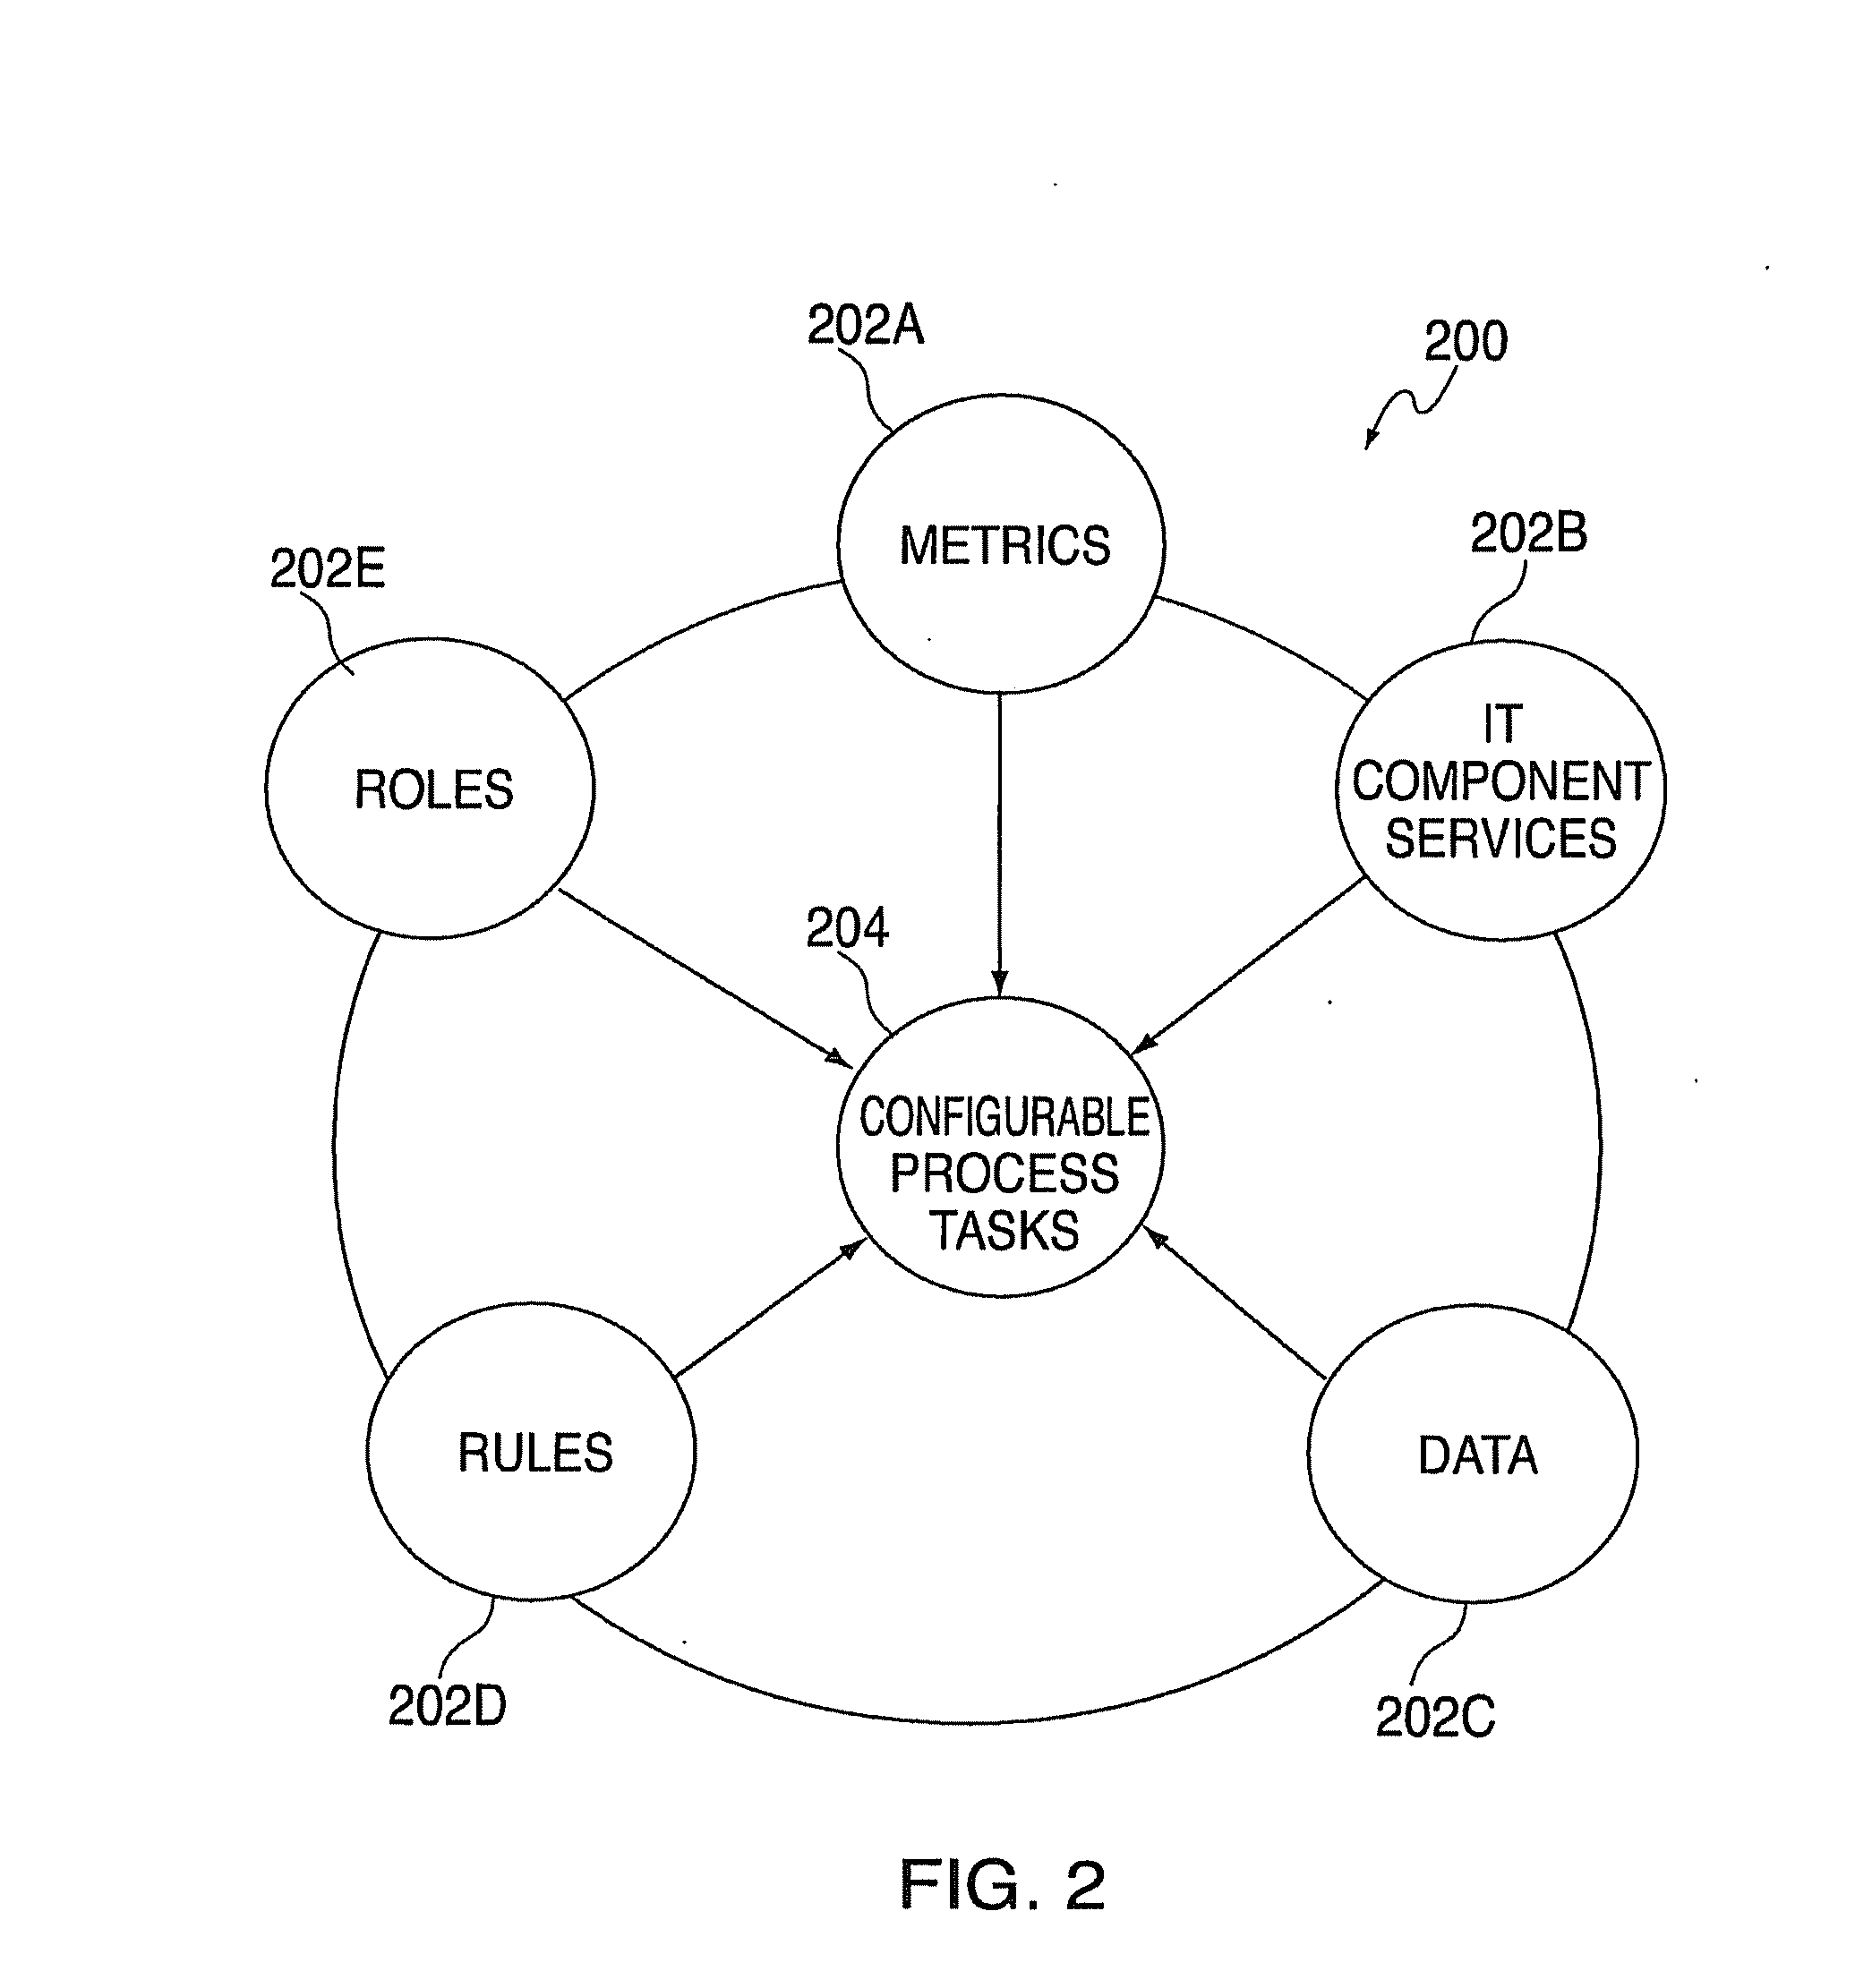 Method, system, and storage medium for implementing business process modules